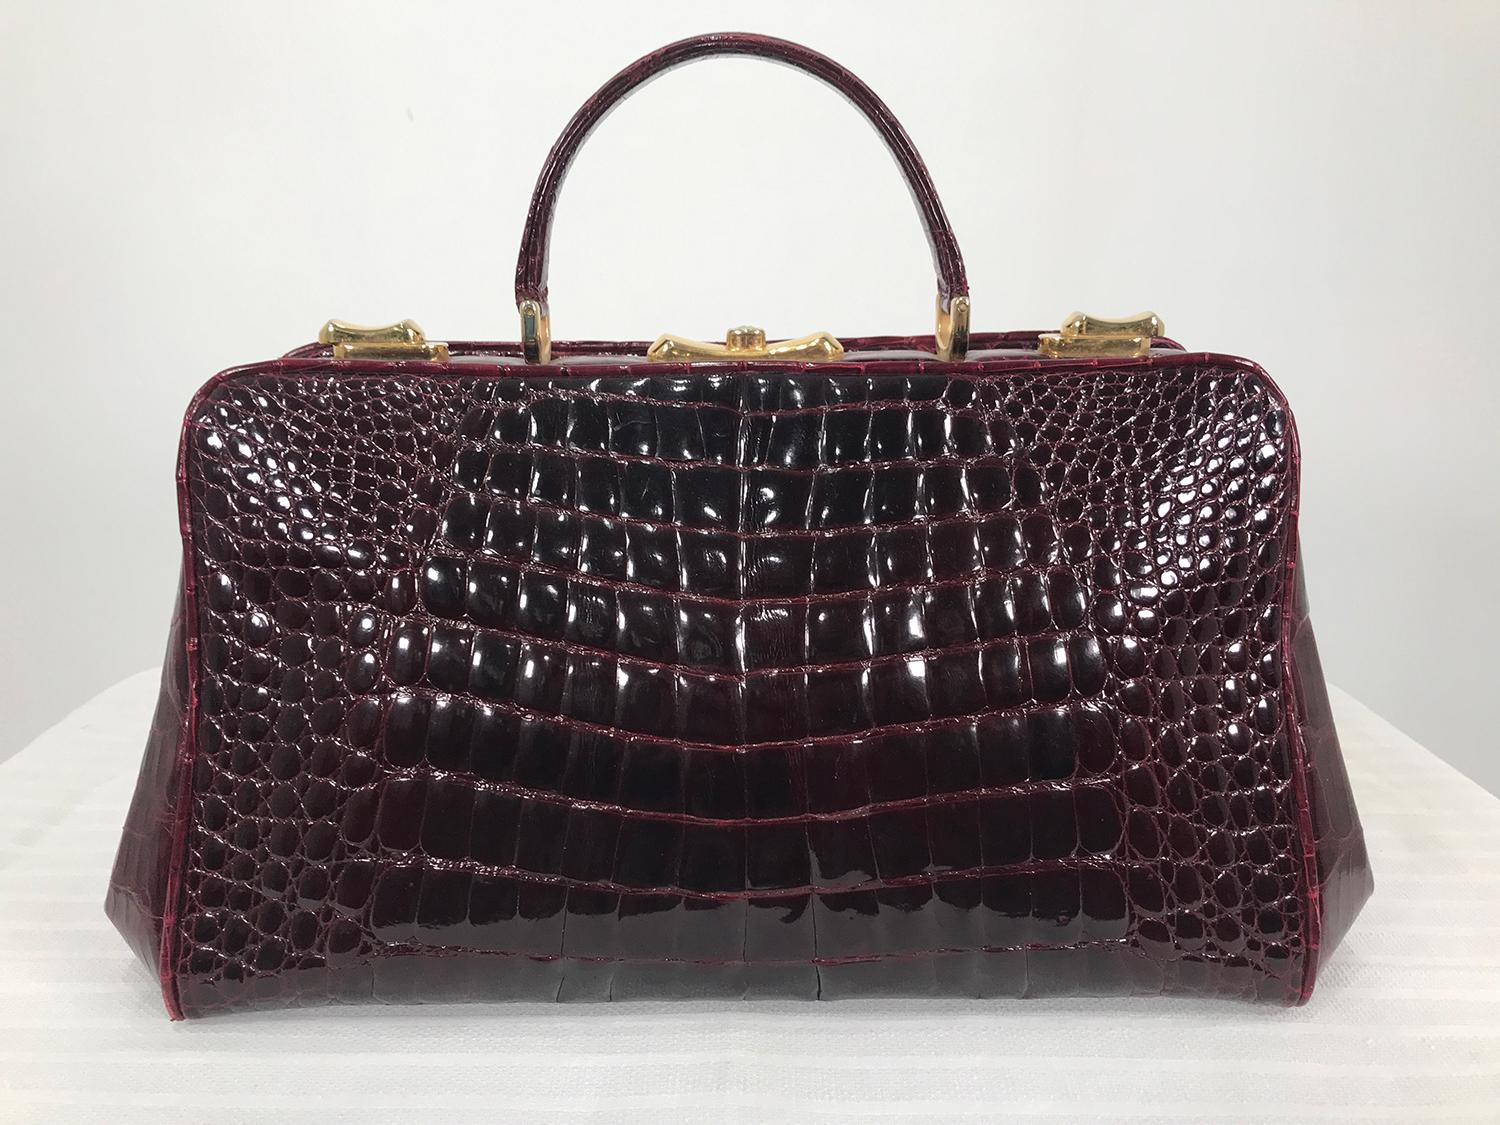 Vintage 1970s  glazed burgundy alligator satchel with gold hardware. This beautiful frame handbag has a single handle, the bag has gold hardware consisting, top side locks, center push lock with key, handle attachments and 6 feet at the bottom. The